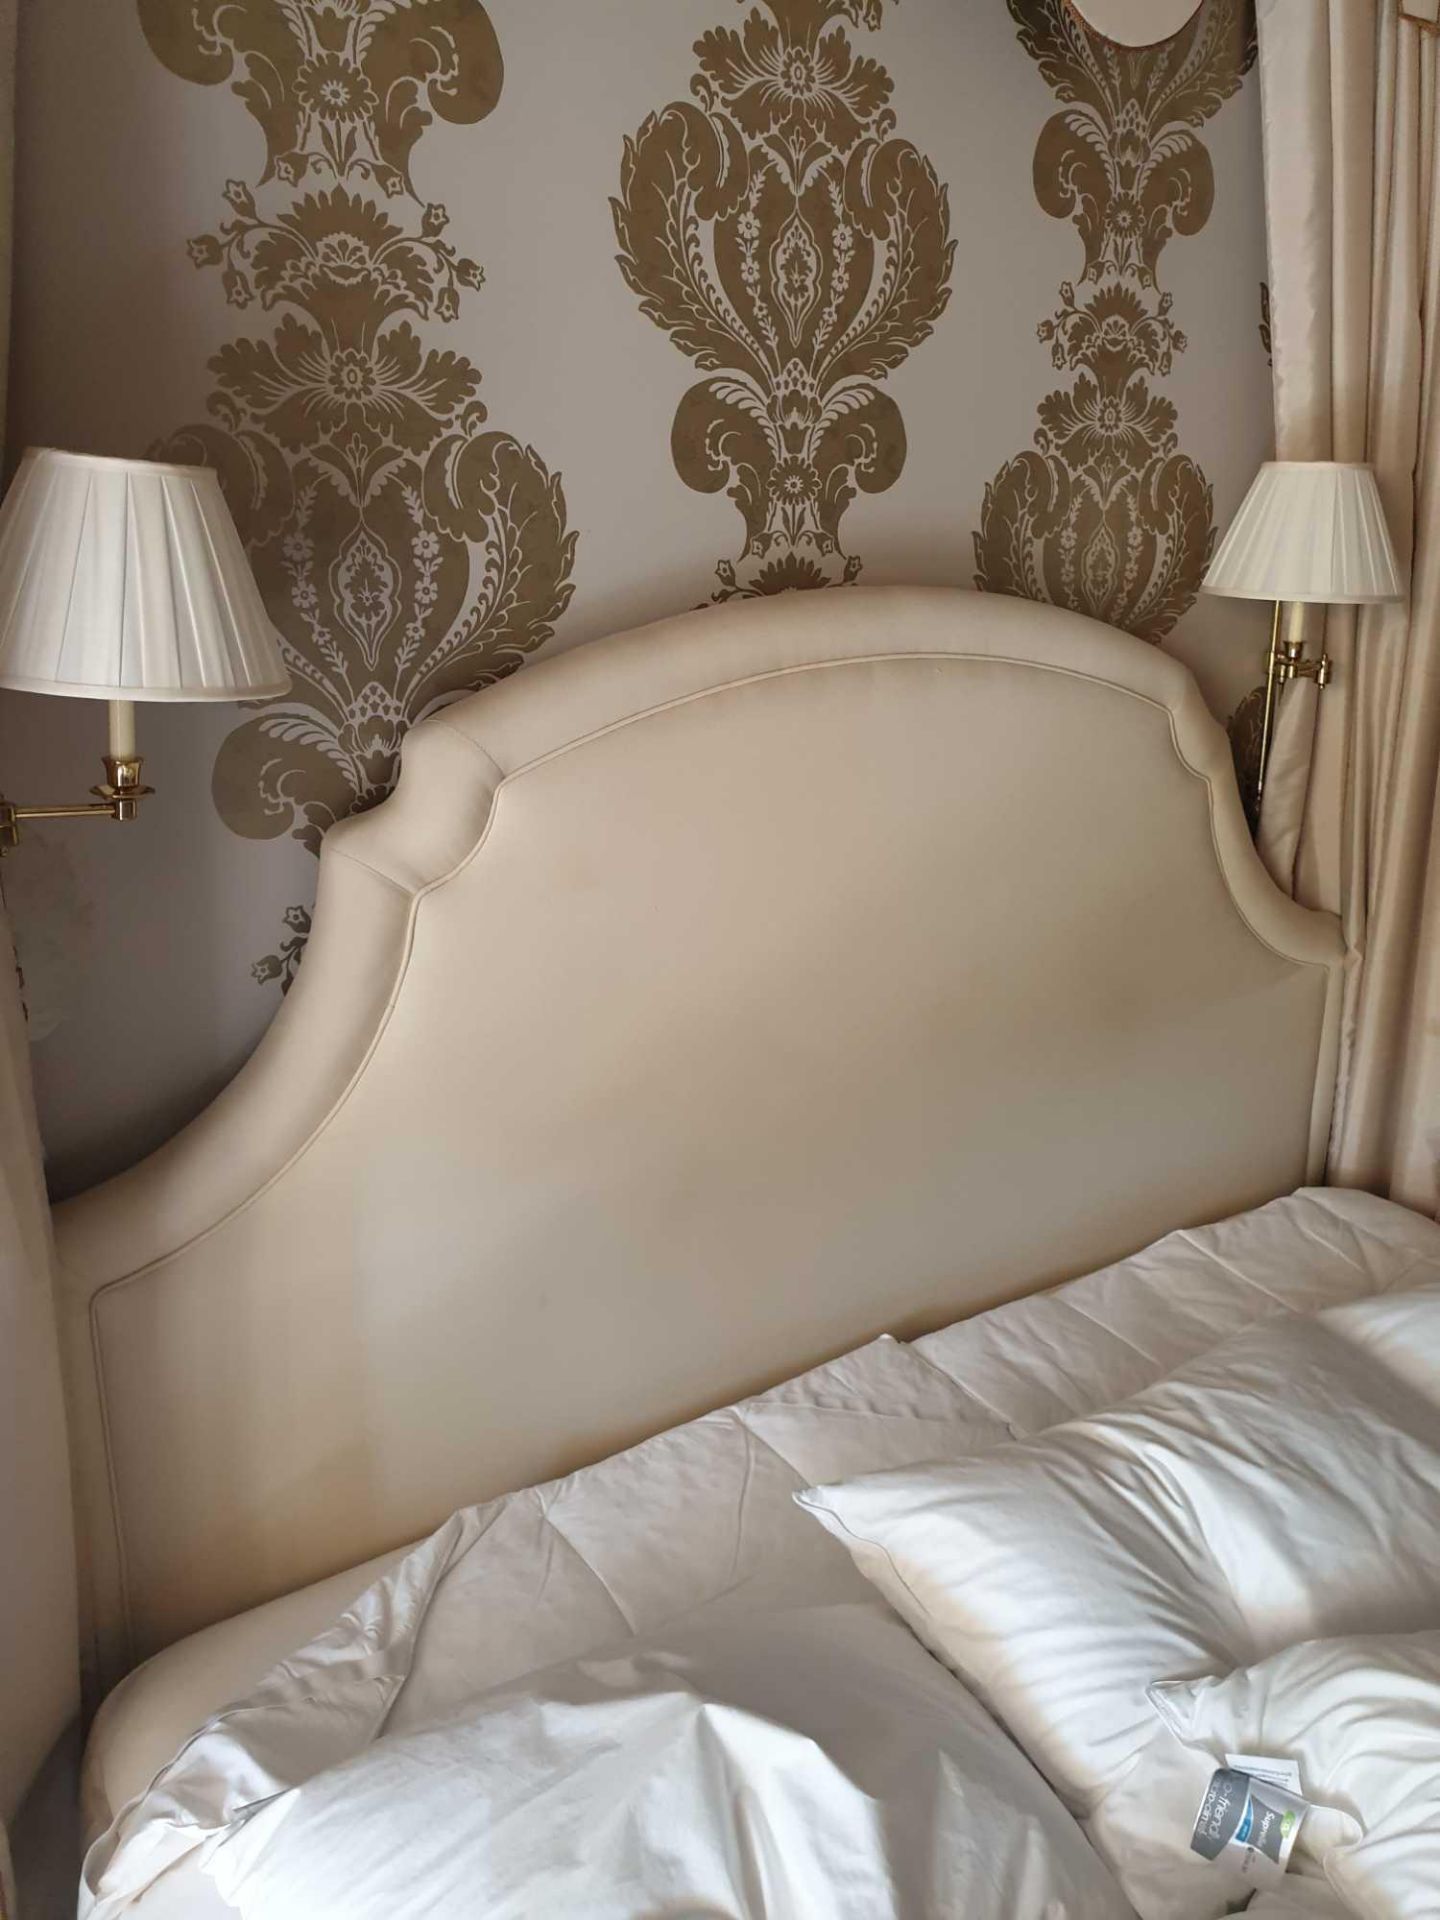 Bed Canopy Cream And Brown Floating Pelmet And Cream Headboard Silk Curtains Fully Lined Outer - Bild 3 aus 5